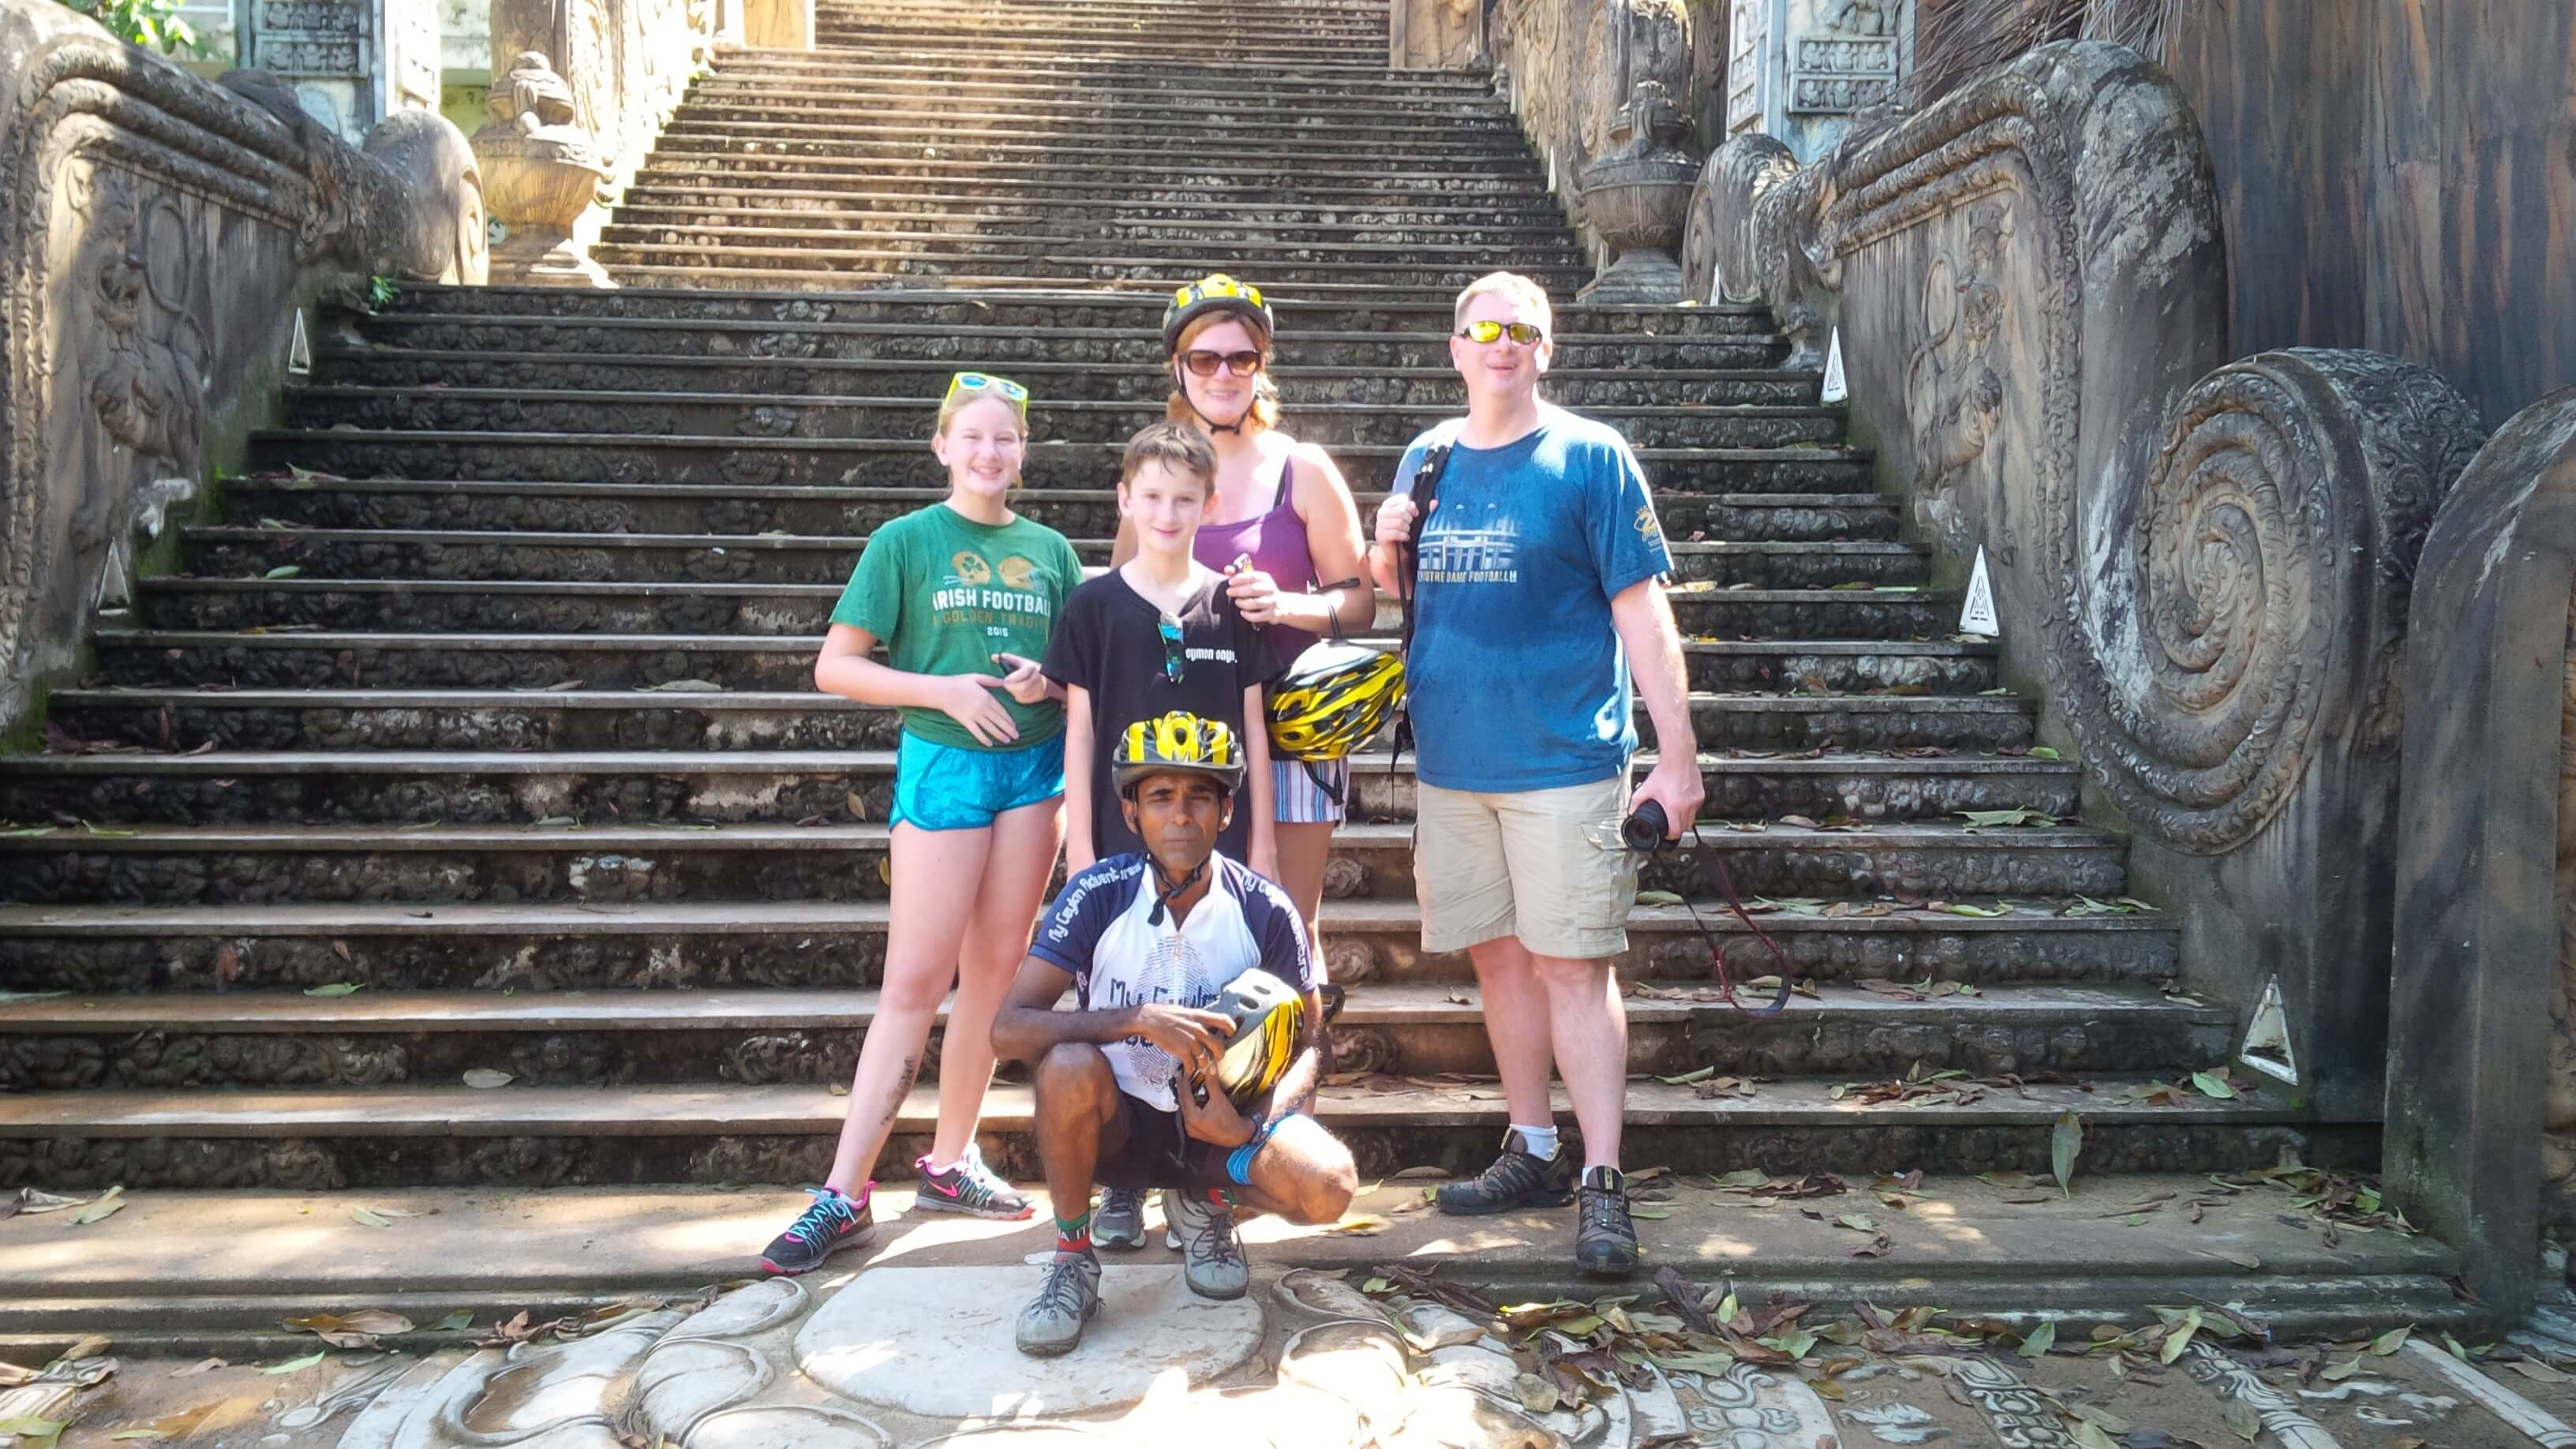 A photo of cyclists on the ancient temple steps and moonstone 